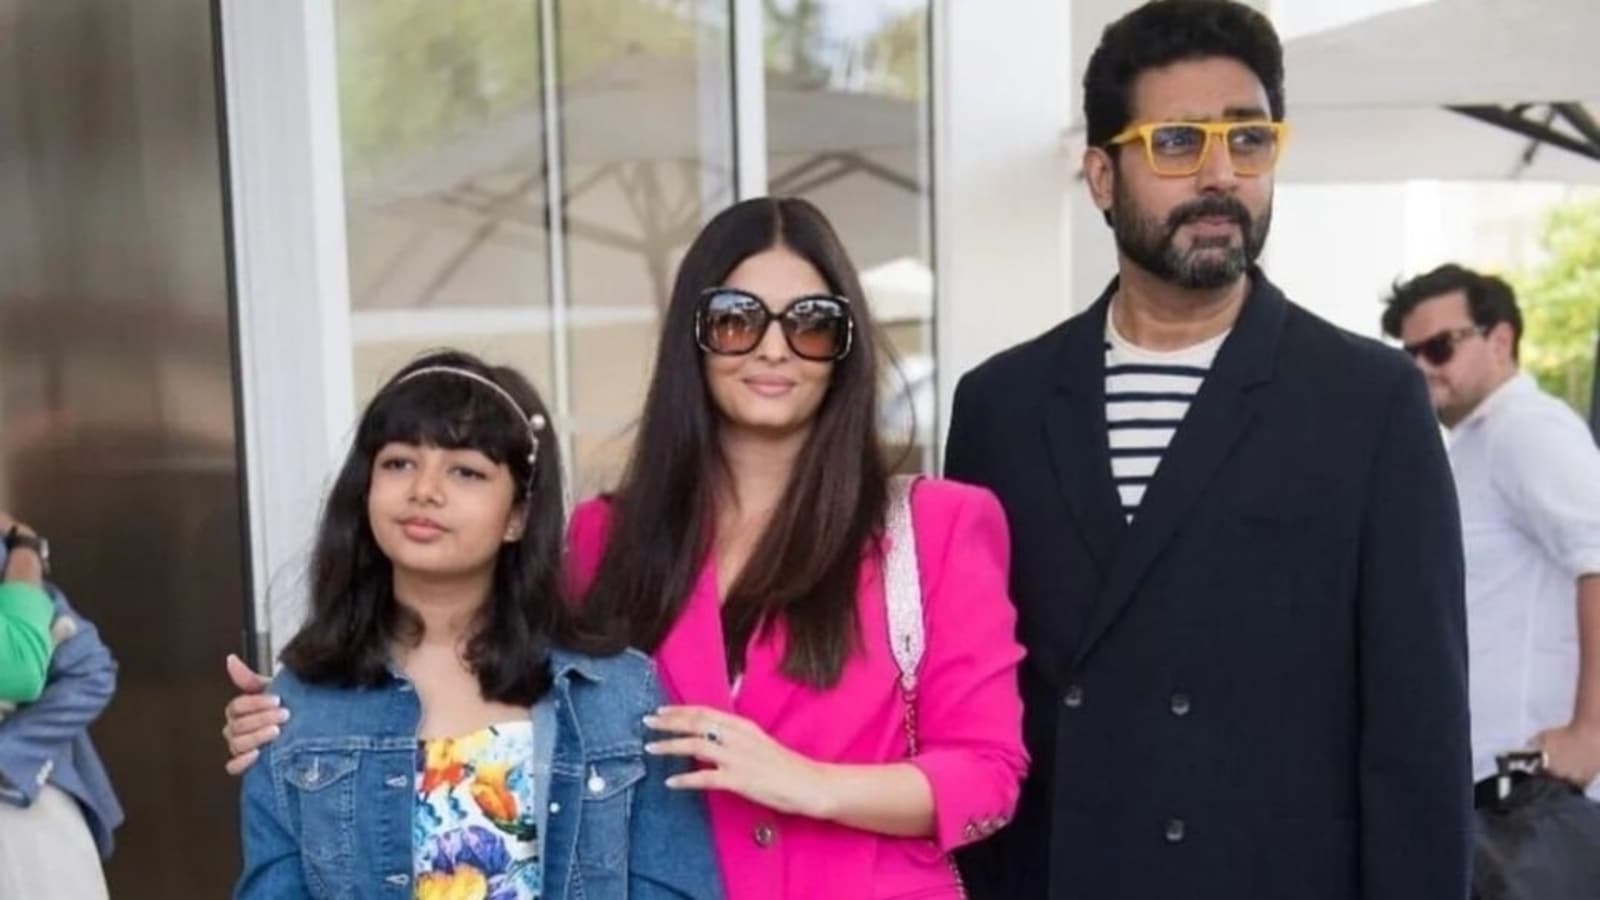 Cannes 2022: Aishwarya Rai dons hot pink blazer and distressed jeans for casual date with Abhishek Bachchan, Aaradhya